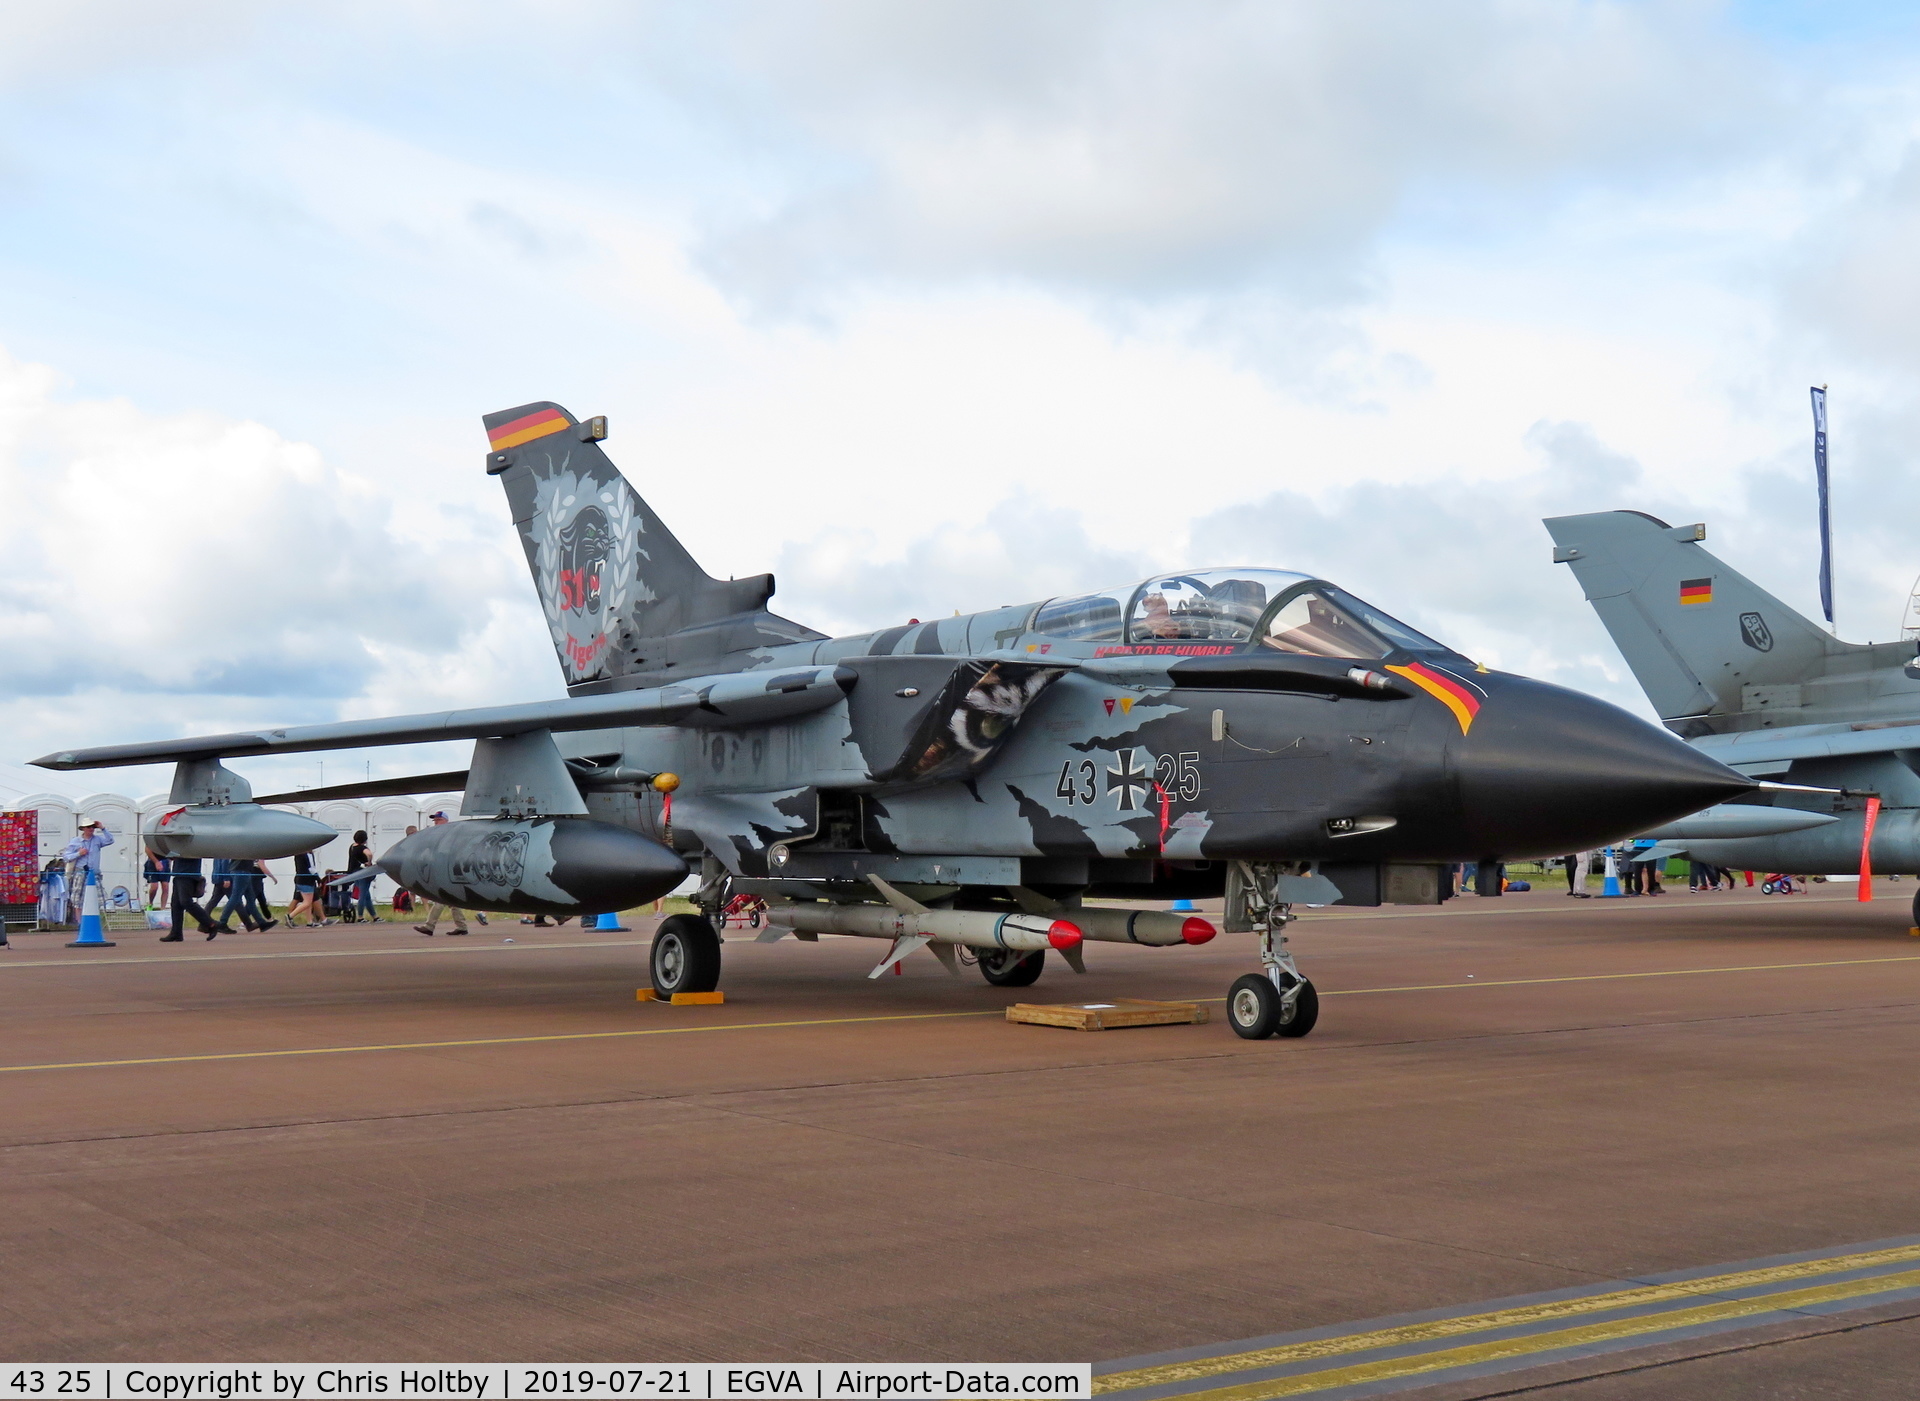 43 25, Panavia Tornado IDS C/N 062/GS008/4025, Static display (note double-sided tail livery) at RIAT 2019 RAF Fairford